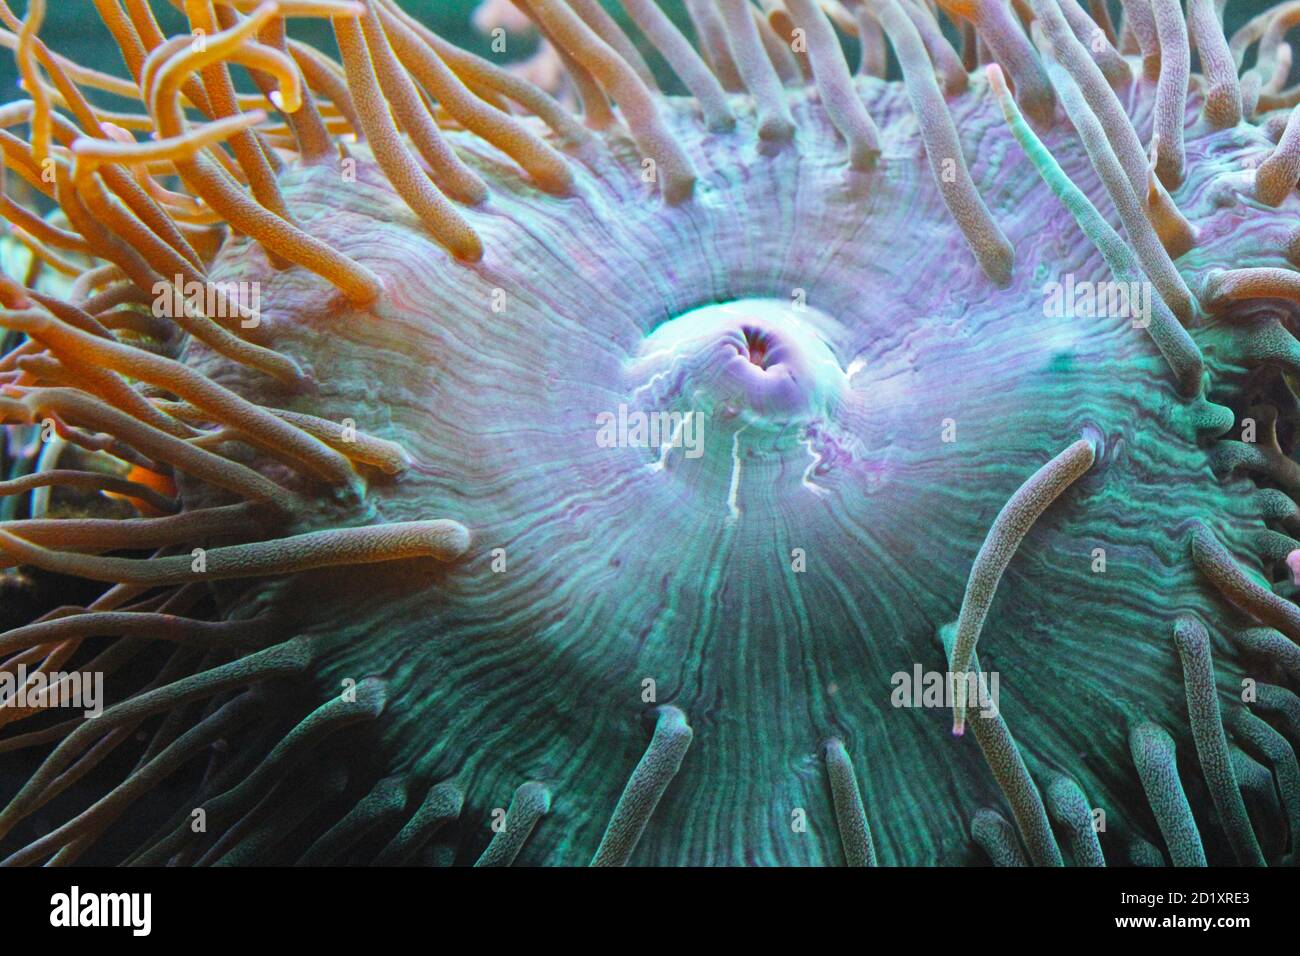 Detail of an anemone Stock Photo